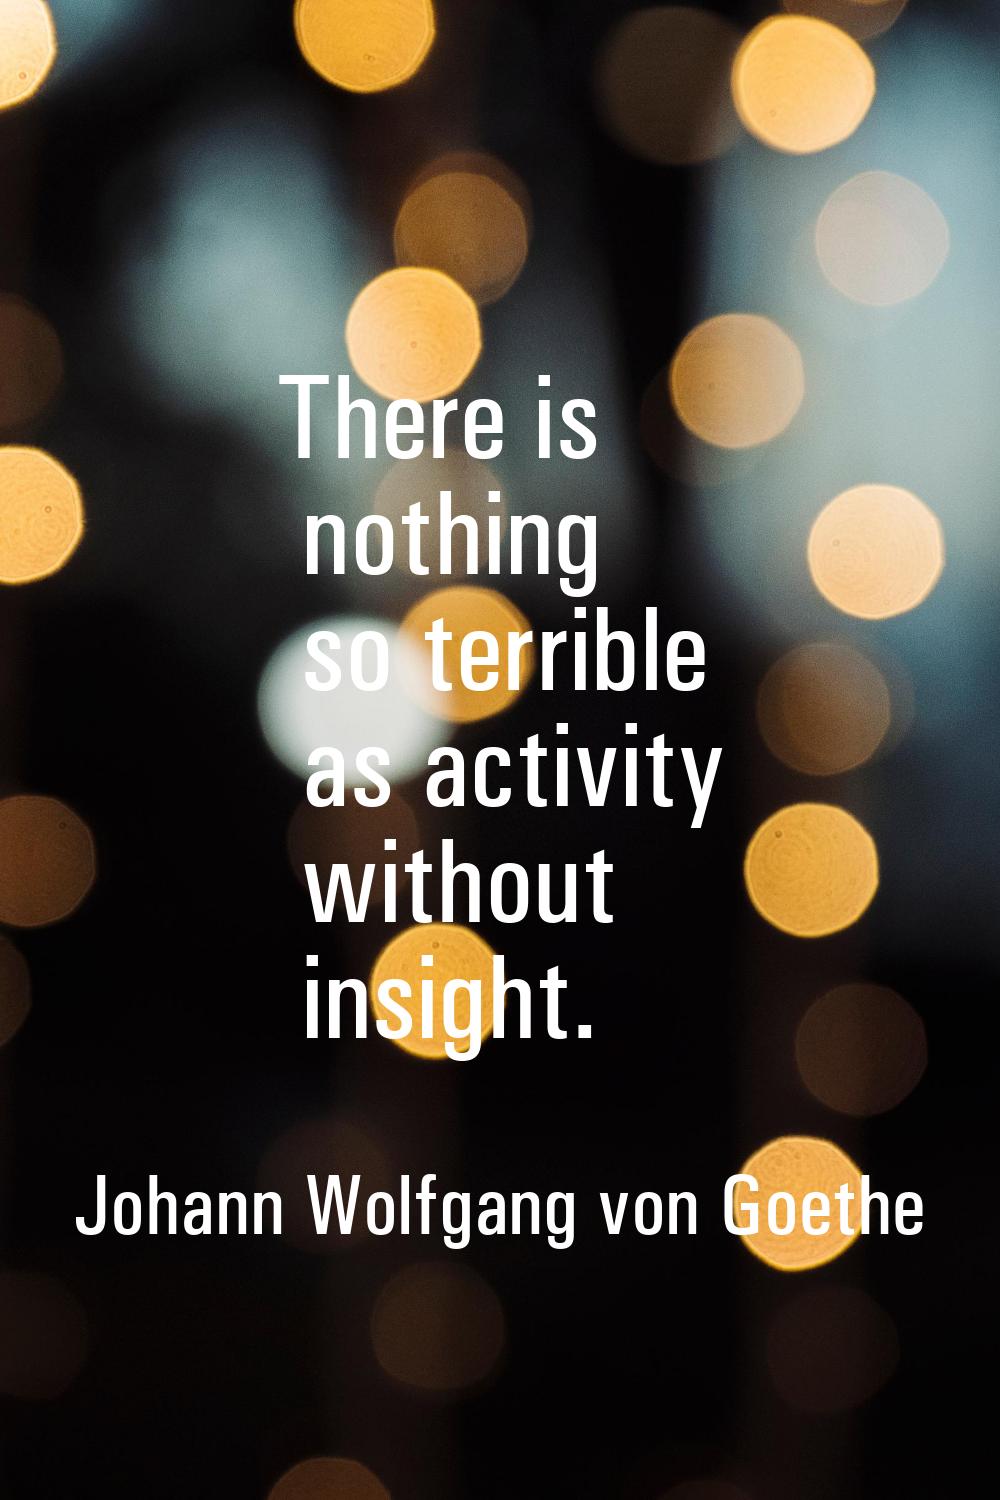 There is nothing so terrible as activity without insight.